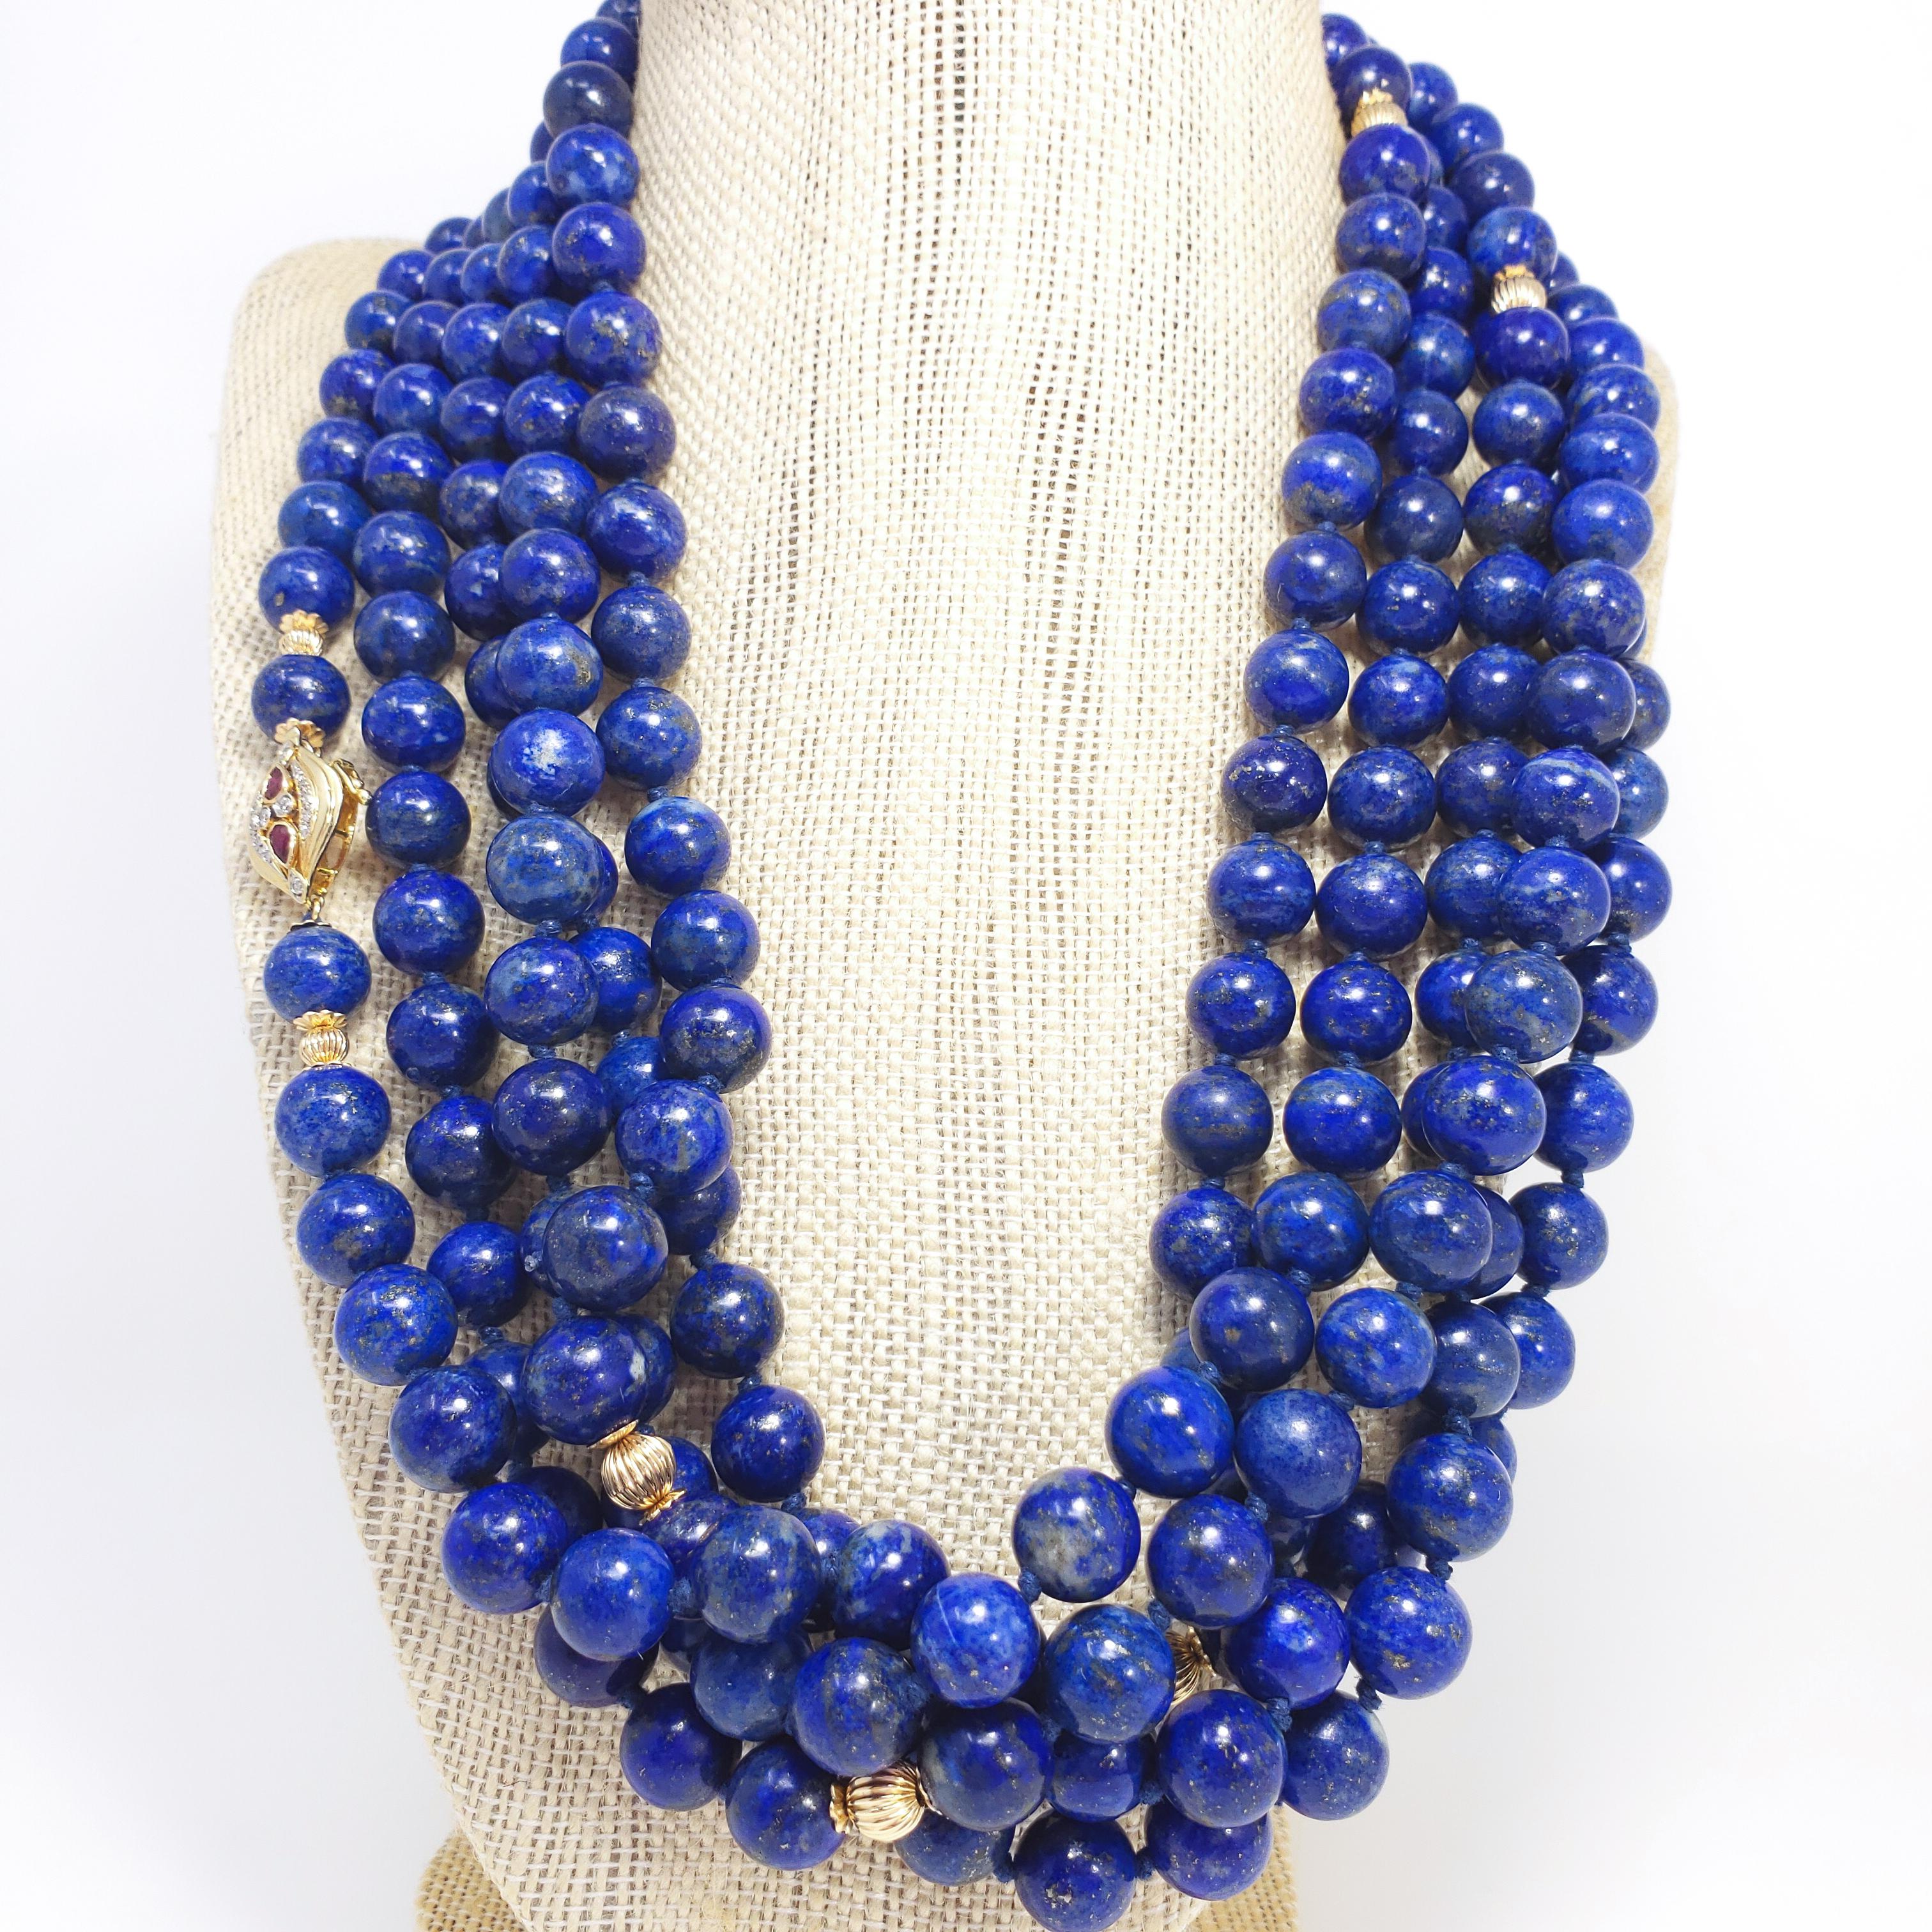 An exquisite, extra long, genuine lapis lazuli bead necklace. Features a single strand of 10mm lapis lazuli beads accented with 14K gold accents and spacers. The 14 karat gold clasp is decorated with two pear-shaped rubies (0.39 total carats) and 14